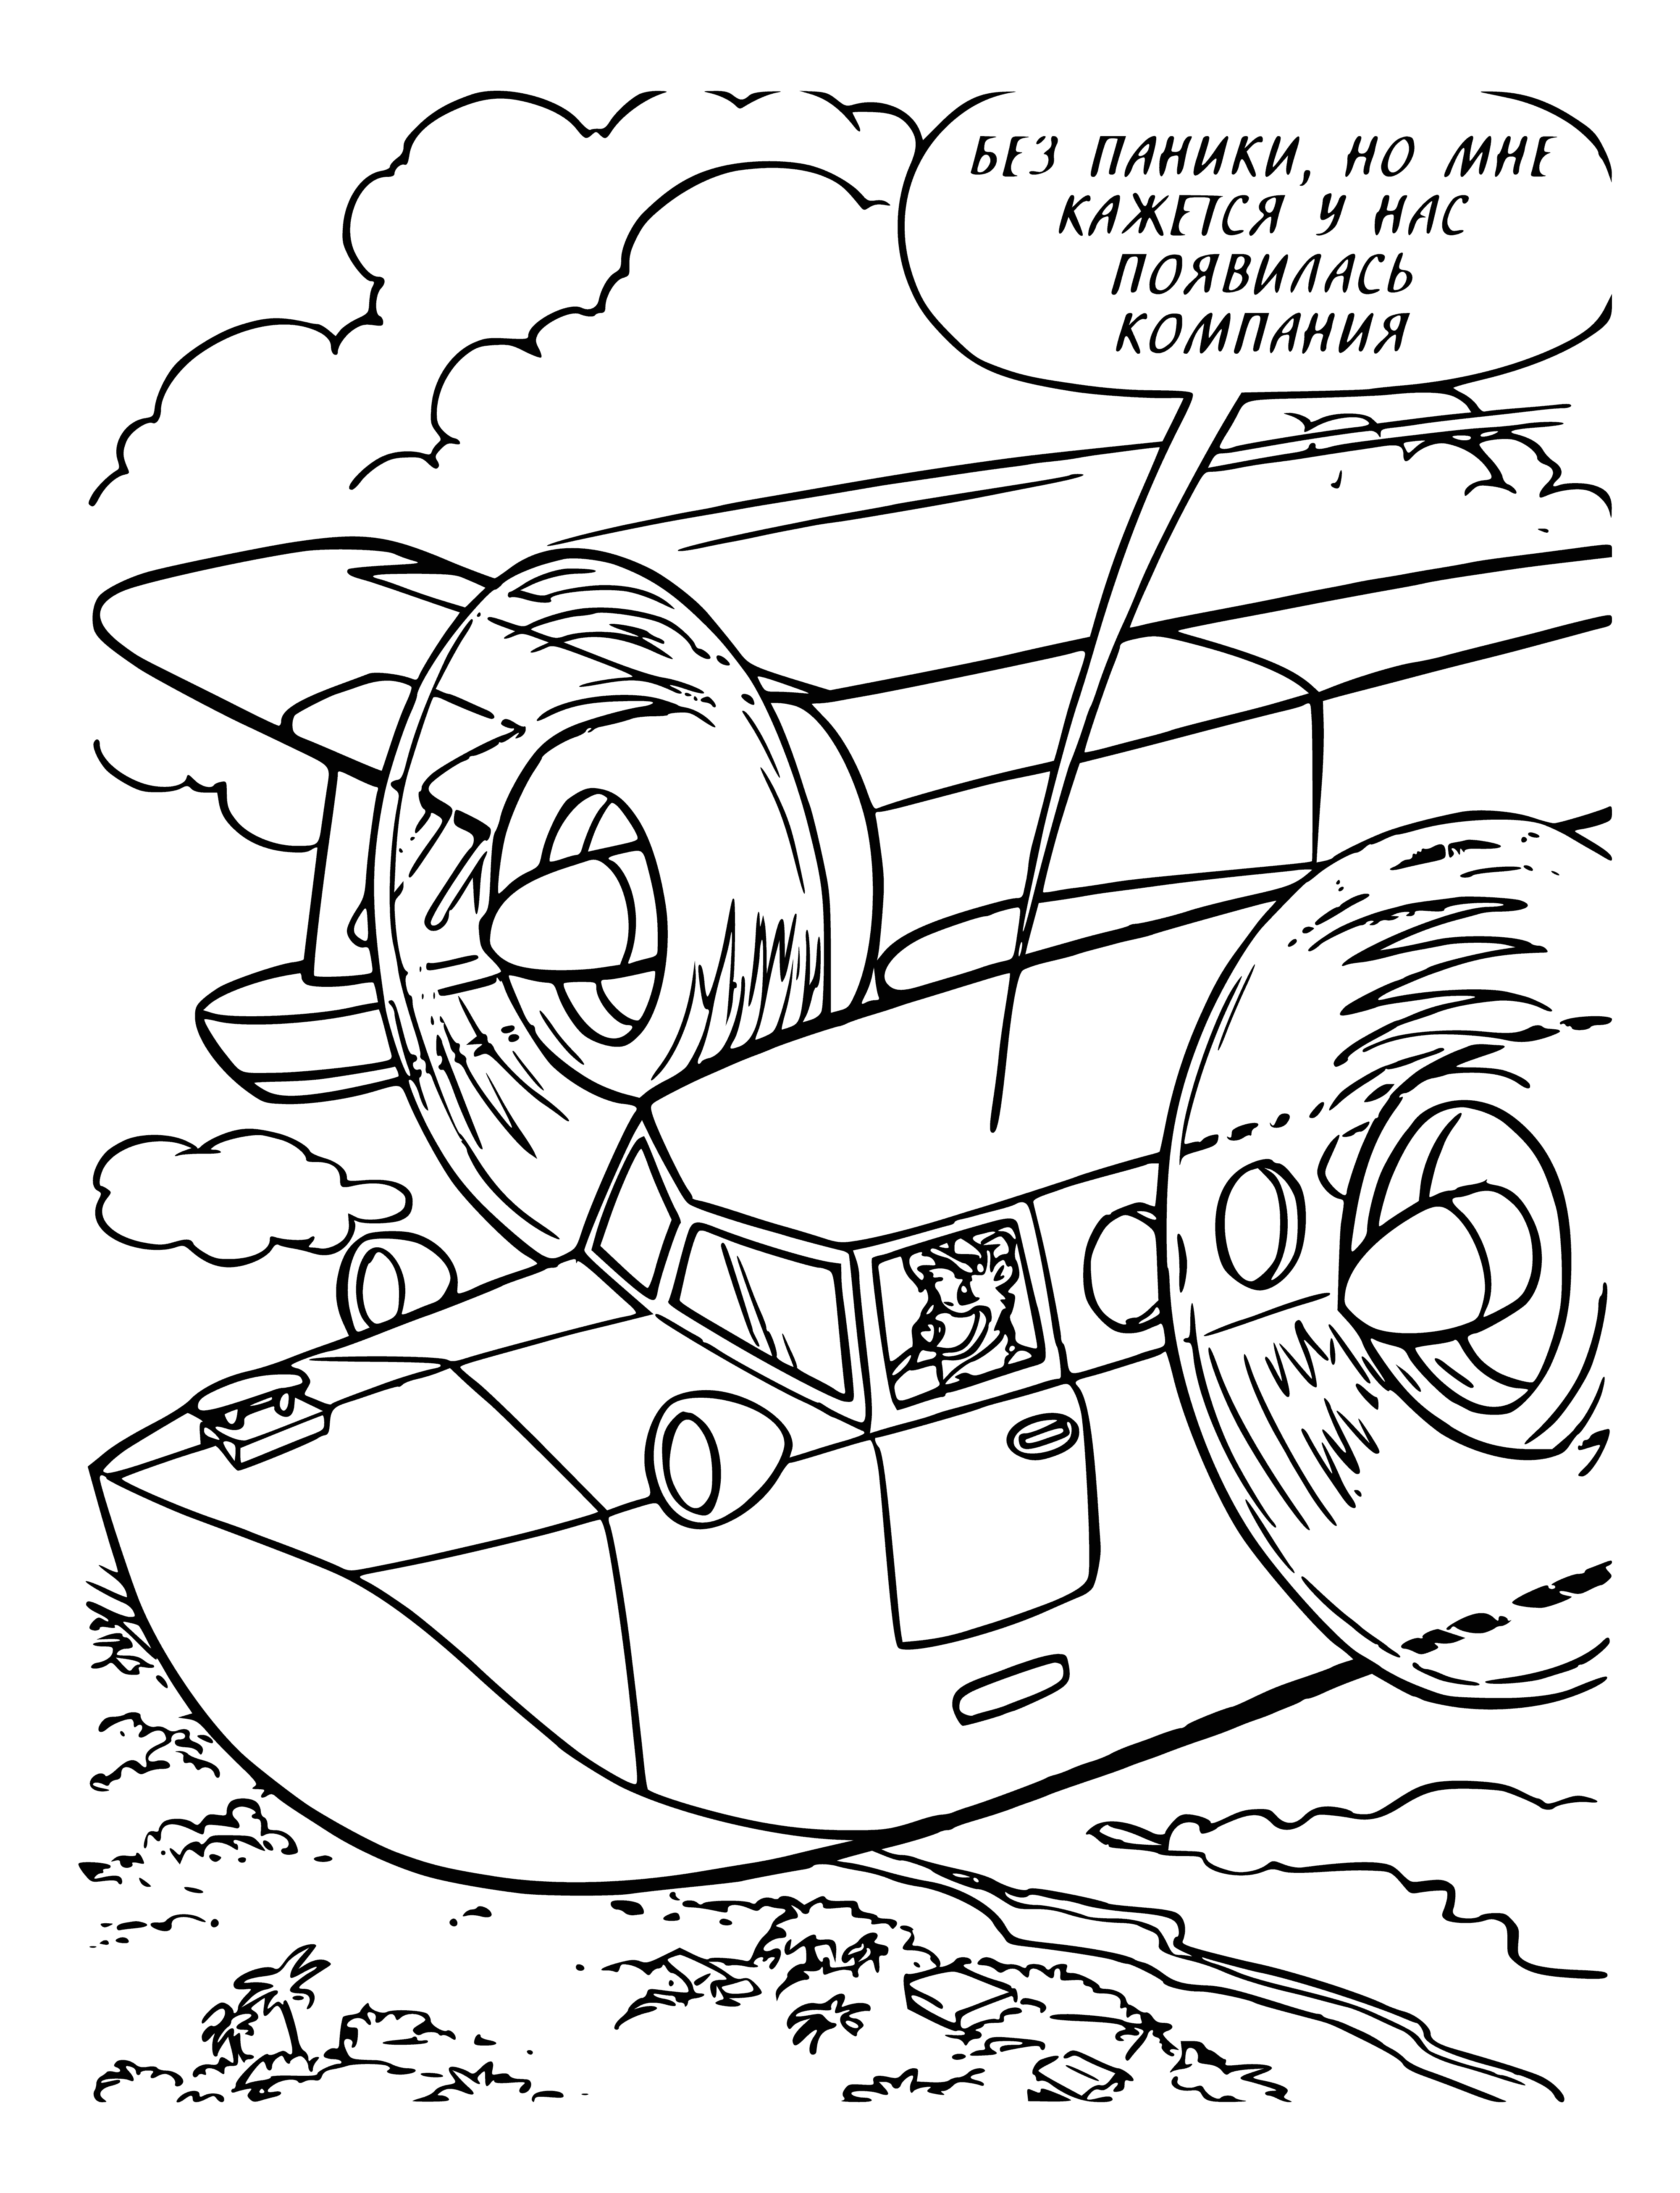 coloring page: A large blue and white plane with "Spin Tales - Baloo" written on it. It has two engines, wings & windows.